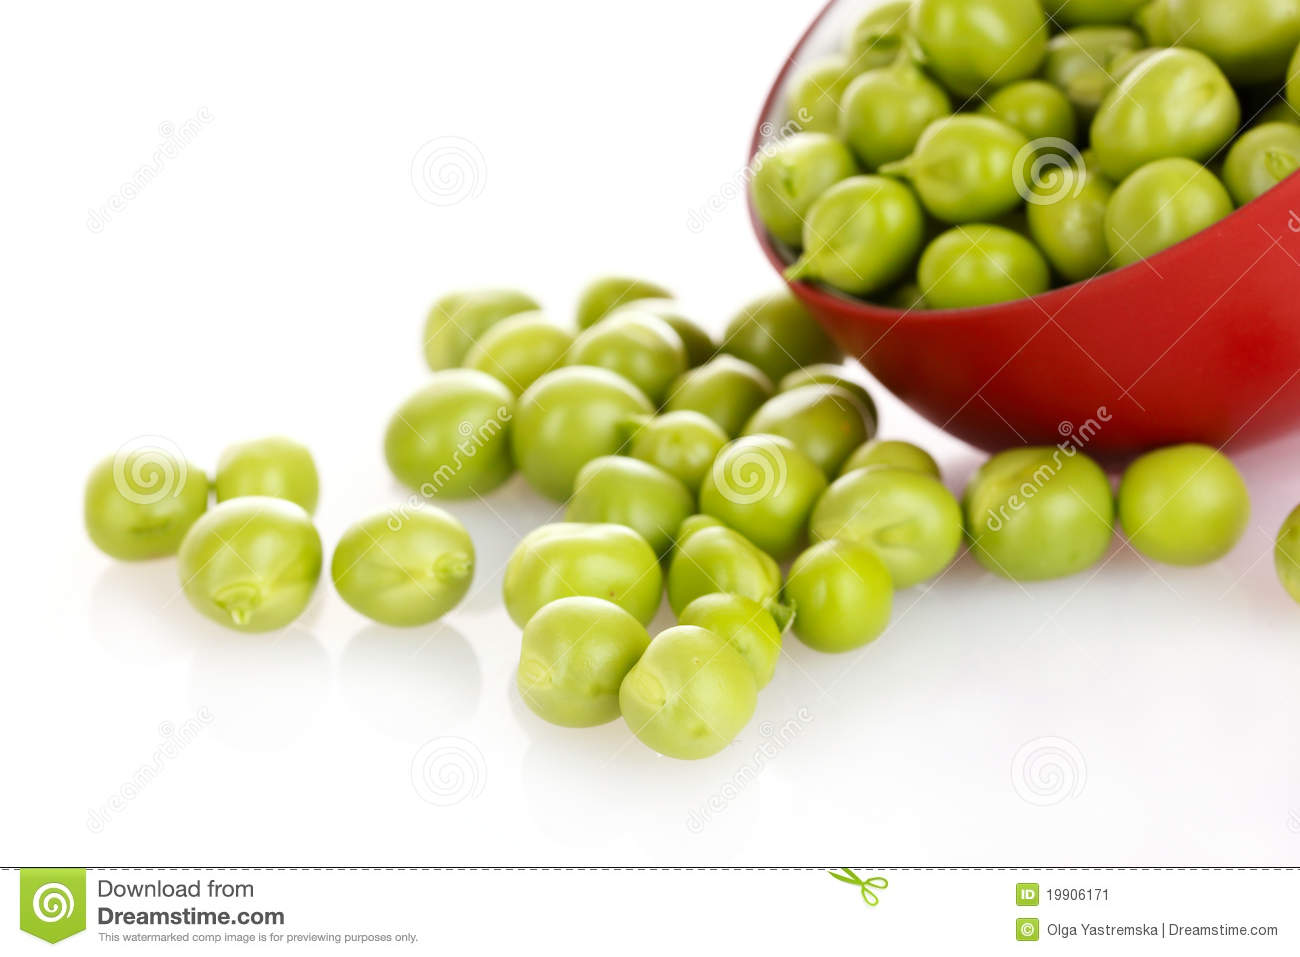 Green Peas In A Red Bowl Stock Image   Image  19906171